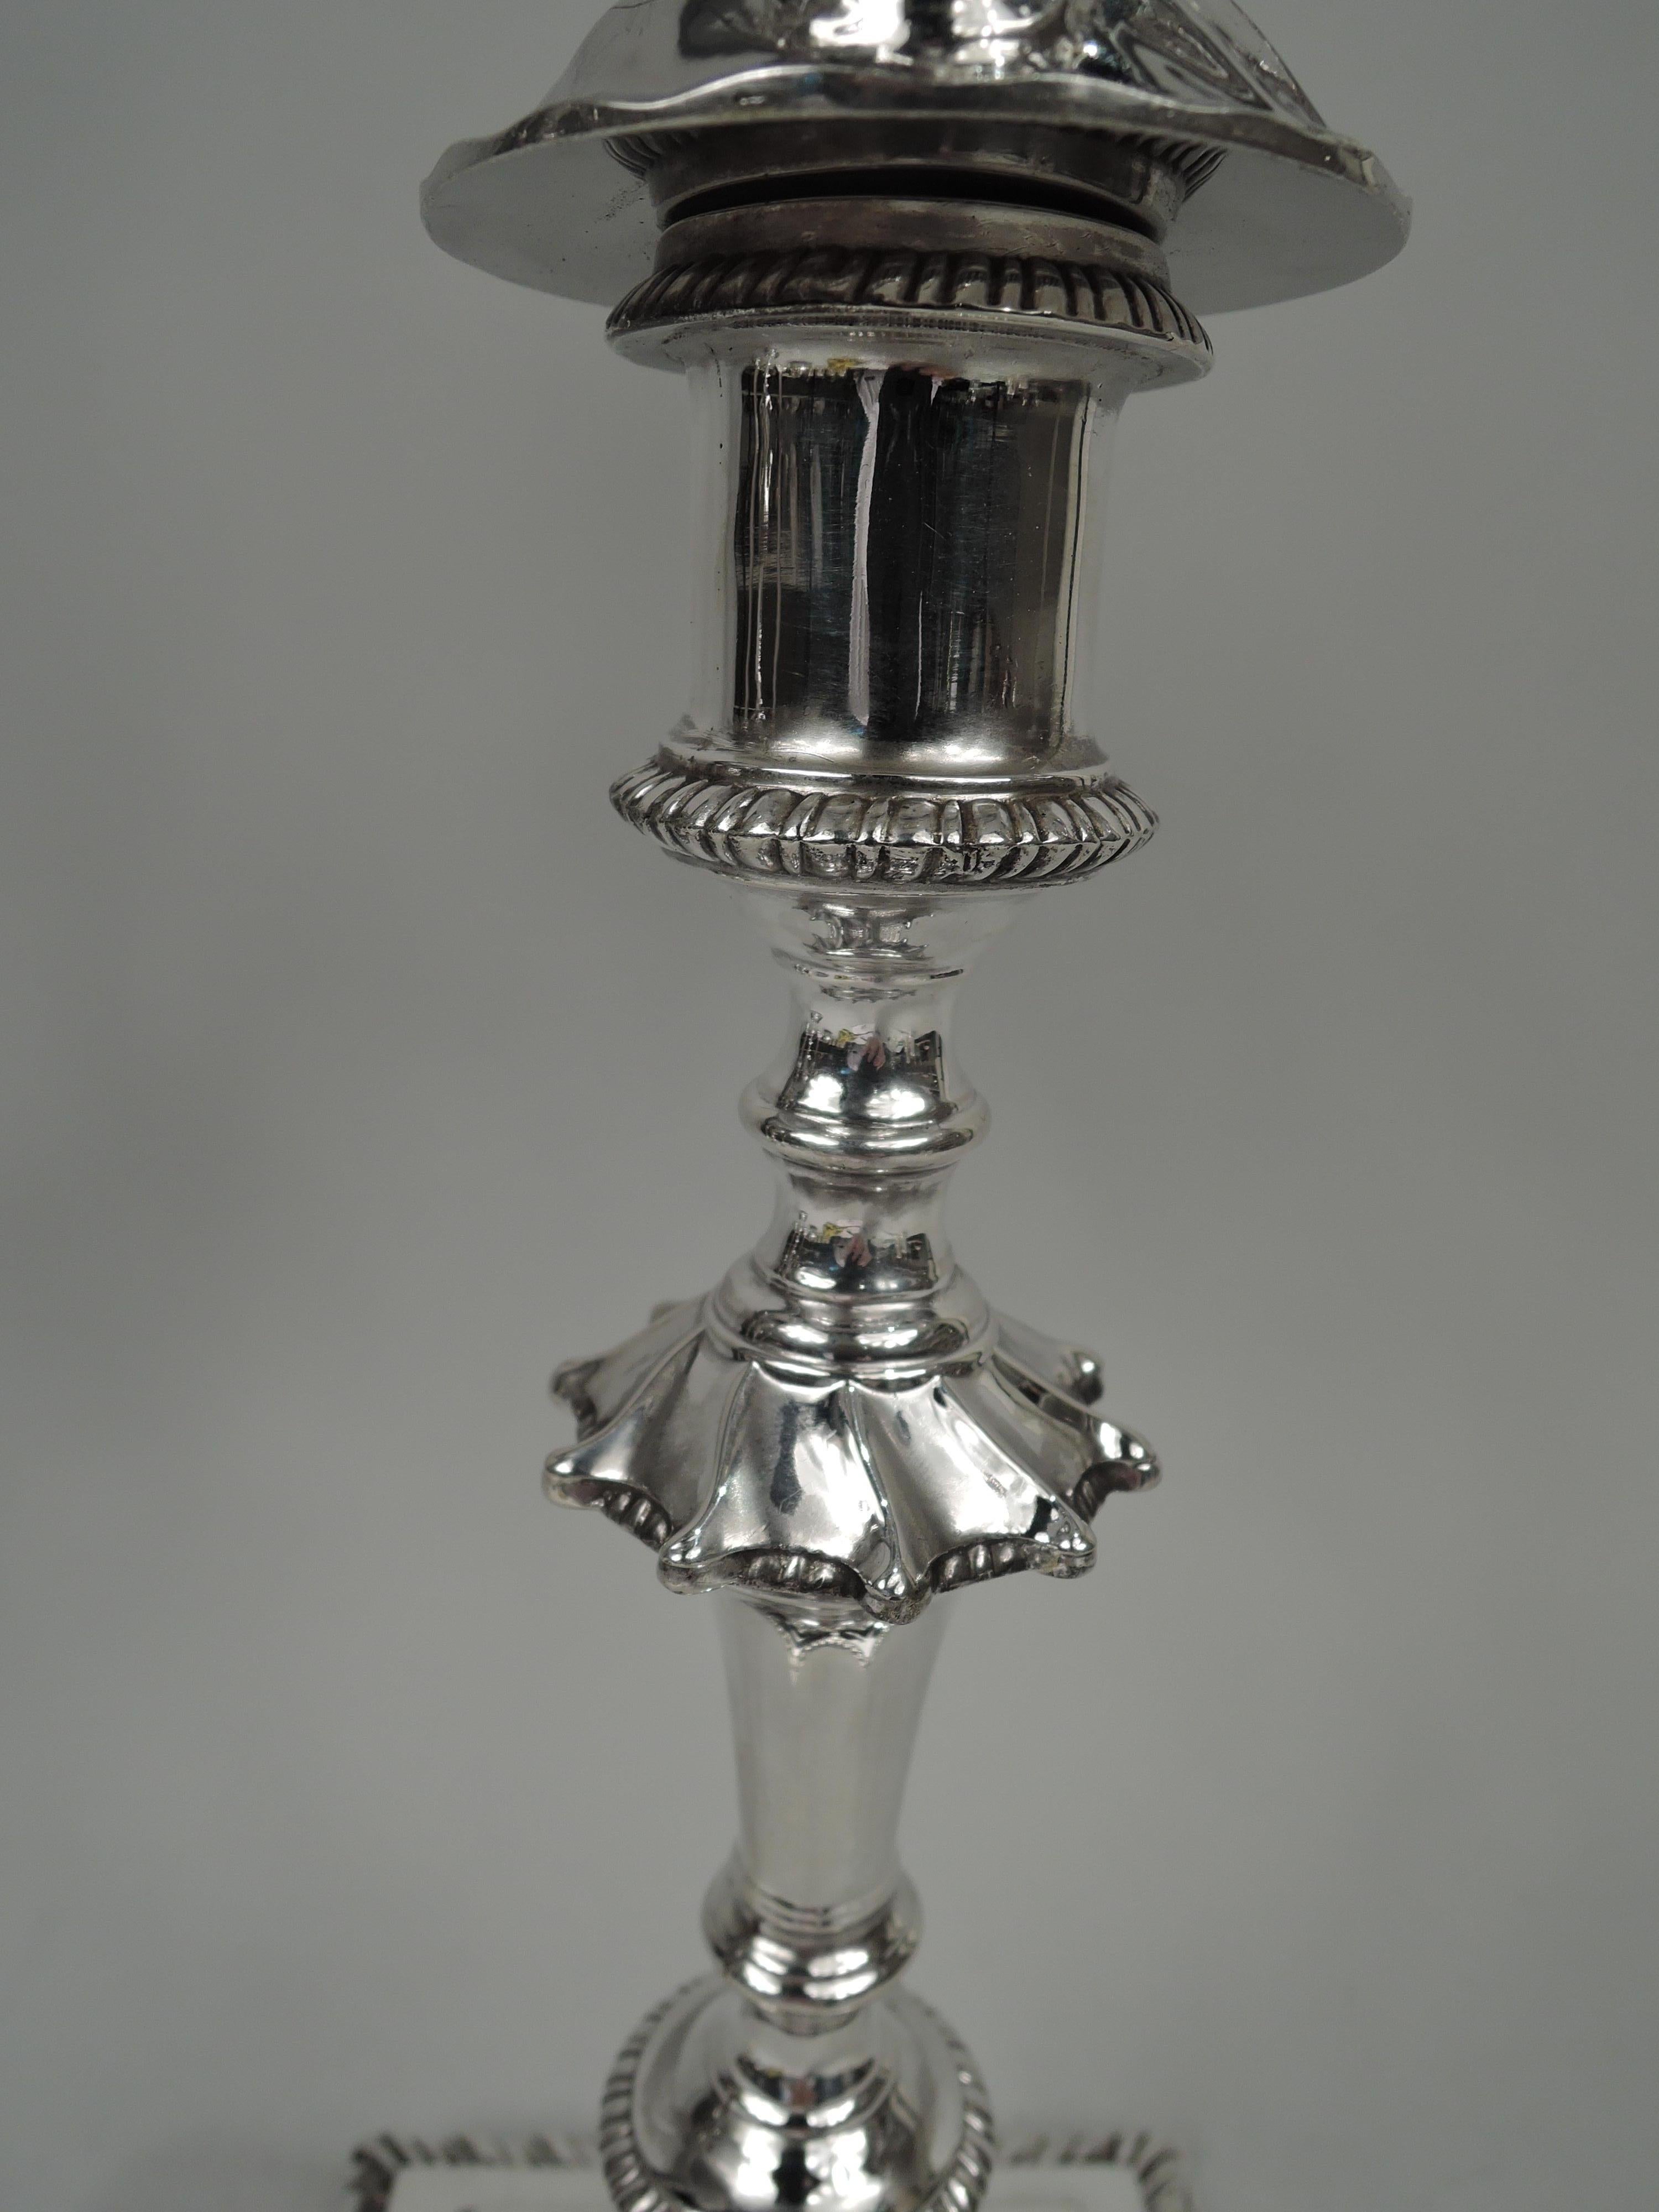 Neoclassical Revival Antique English Edwardian Neoclassical 3-Light Candelabra